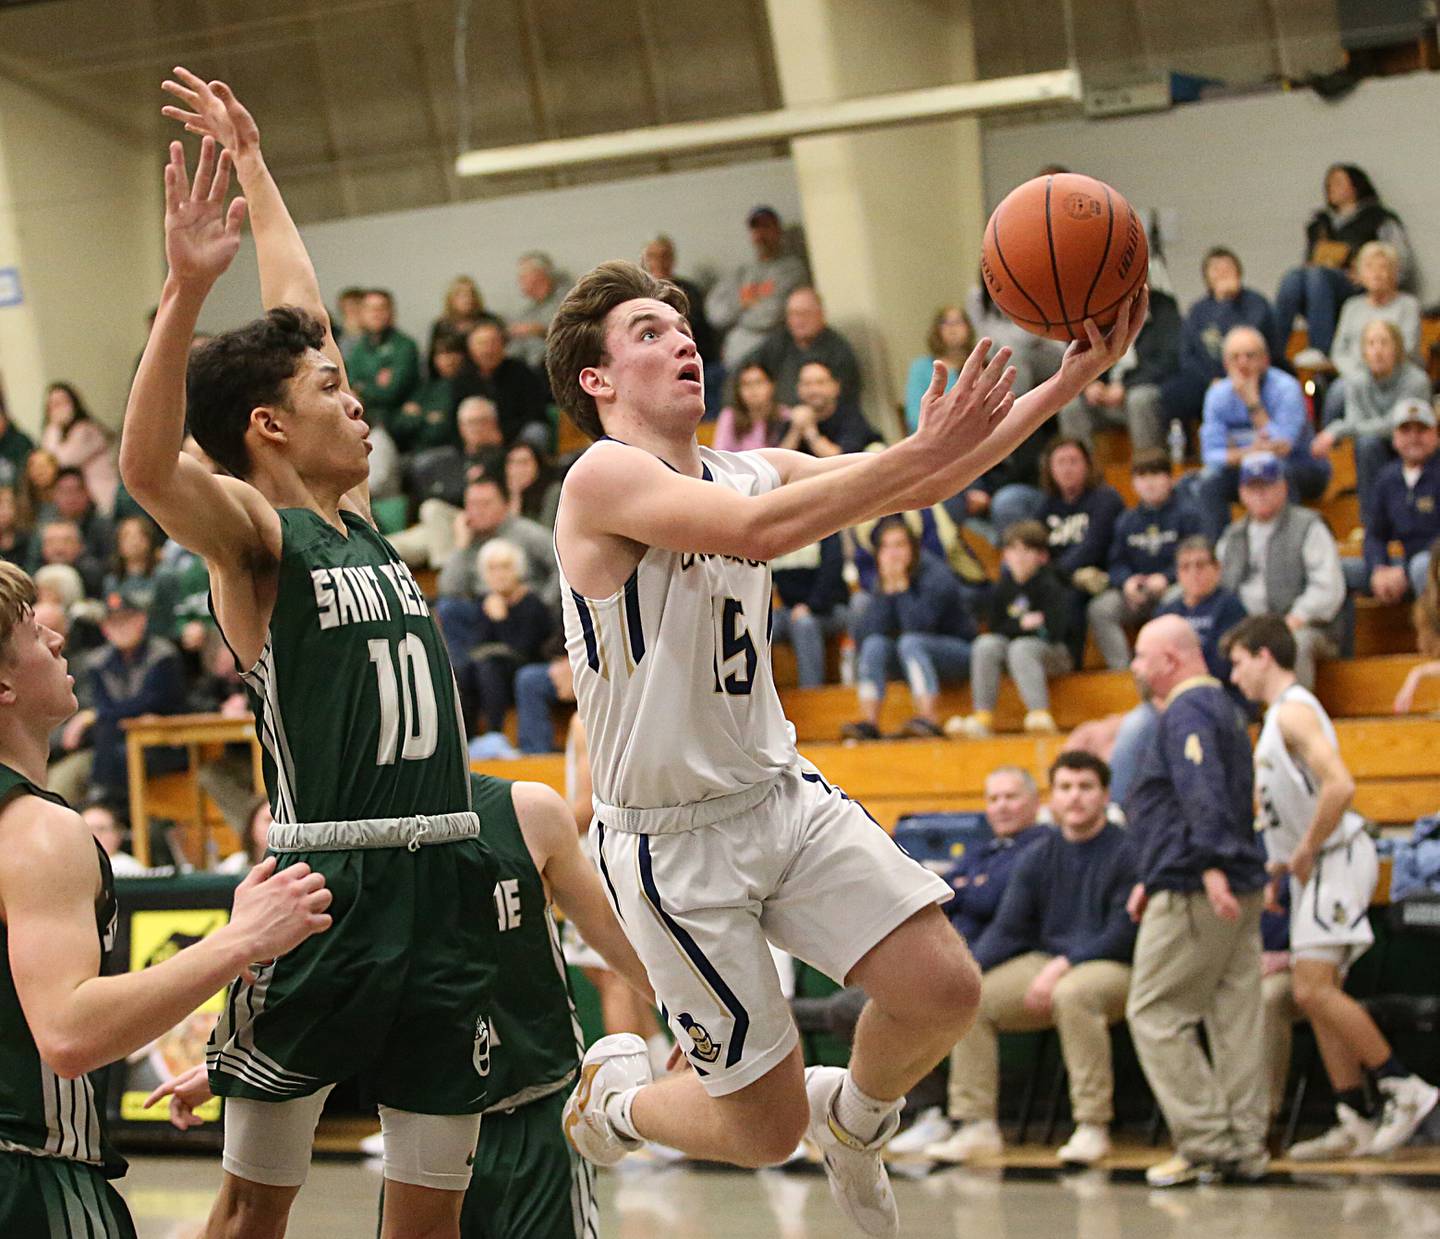 Marquette's Tommy Durdan runs in the lane to score over St. Bede's Isaiah Hart in the Class 1A Regional semifinal on Wednesday, Feb. 22, 2023 at Midland High School.